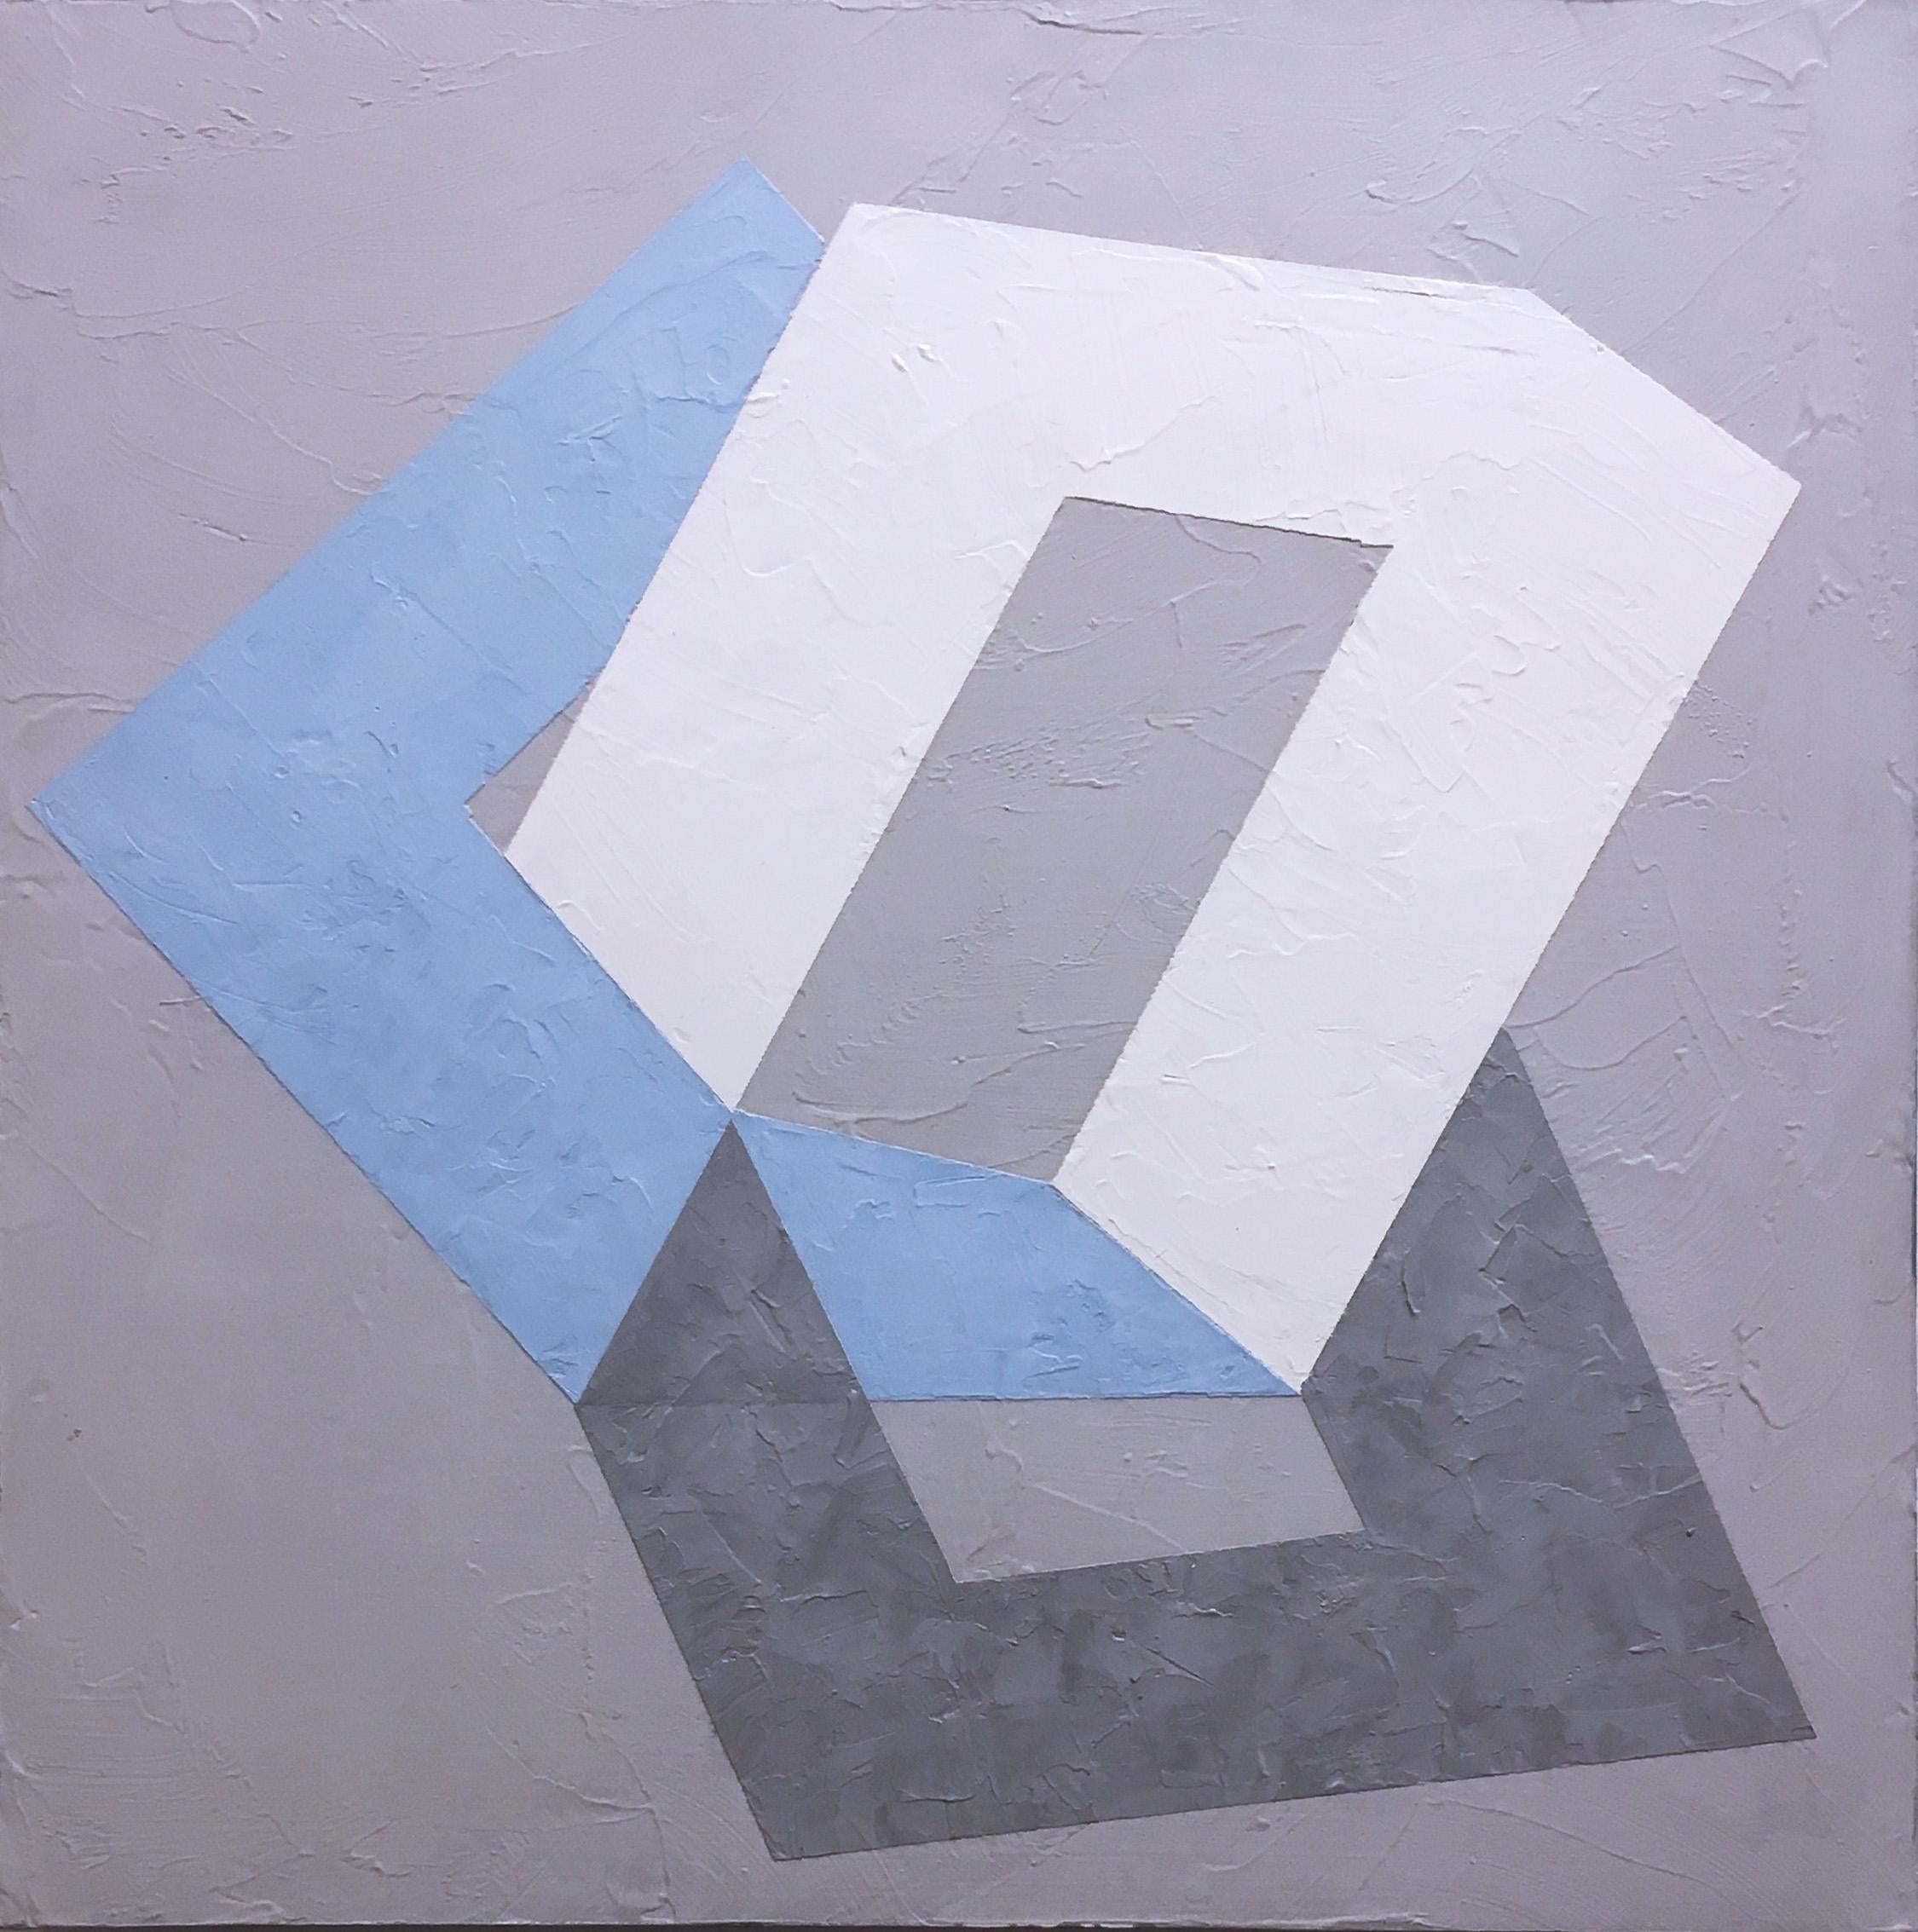 Kati Vilim Abstract Painting - Options II, 2020, Abstract geometry, non-objective, plaster, gray, blue, white